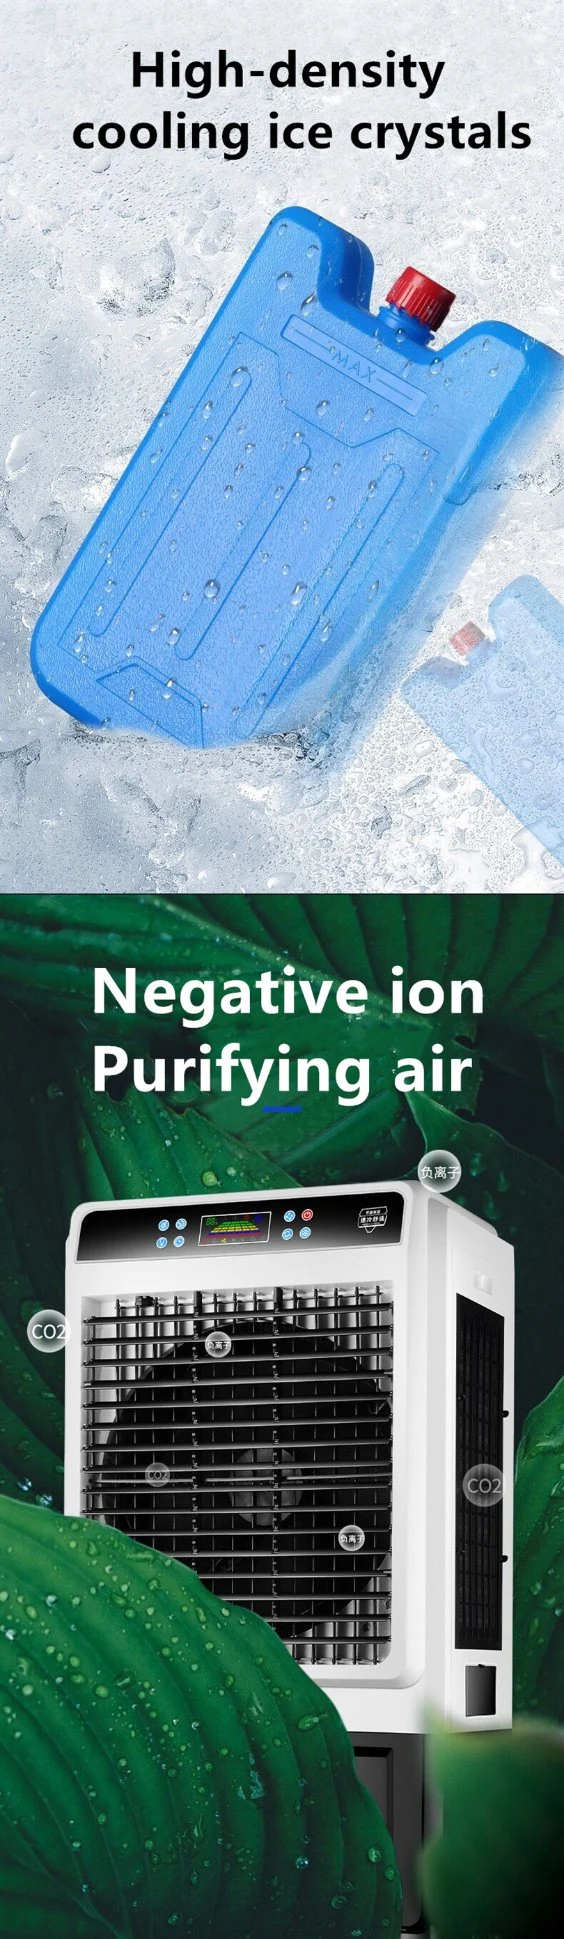 Portable Evaporative Coolers Rooftop Evaporative Air Cooler Climatizador Evaporativo Evaporative Air Cooler